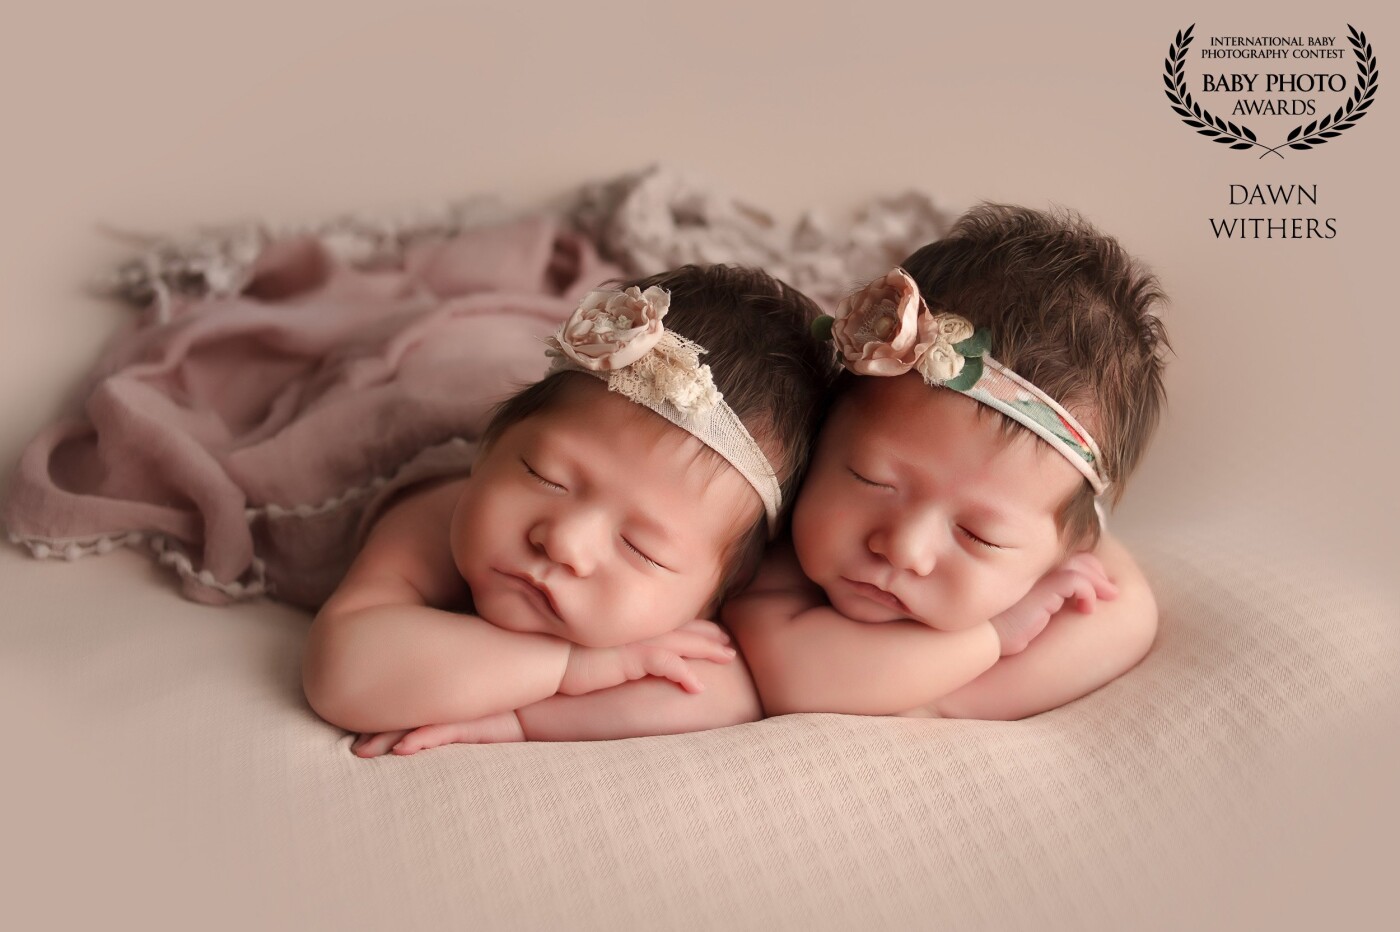 Having a set of twins of my own I find a real thrill working with newborn twins. This set of adorable baby girls was such a joy to work with.